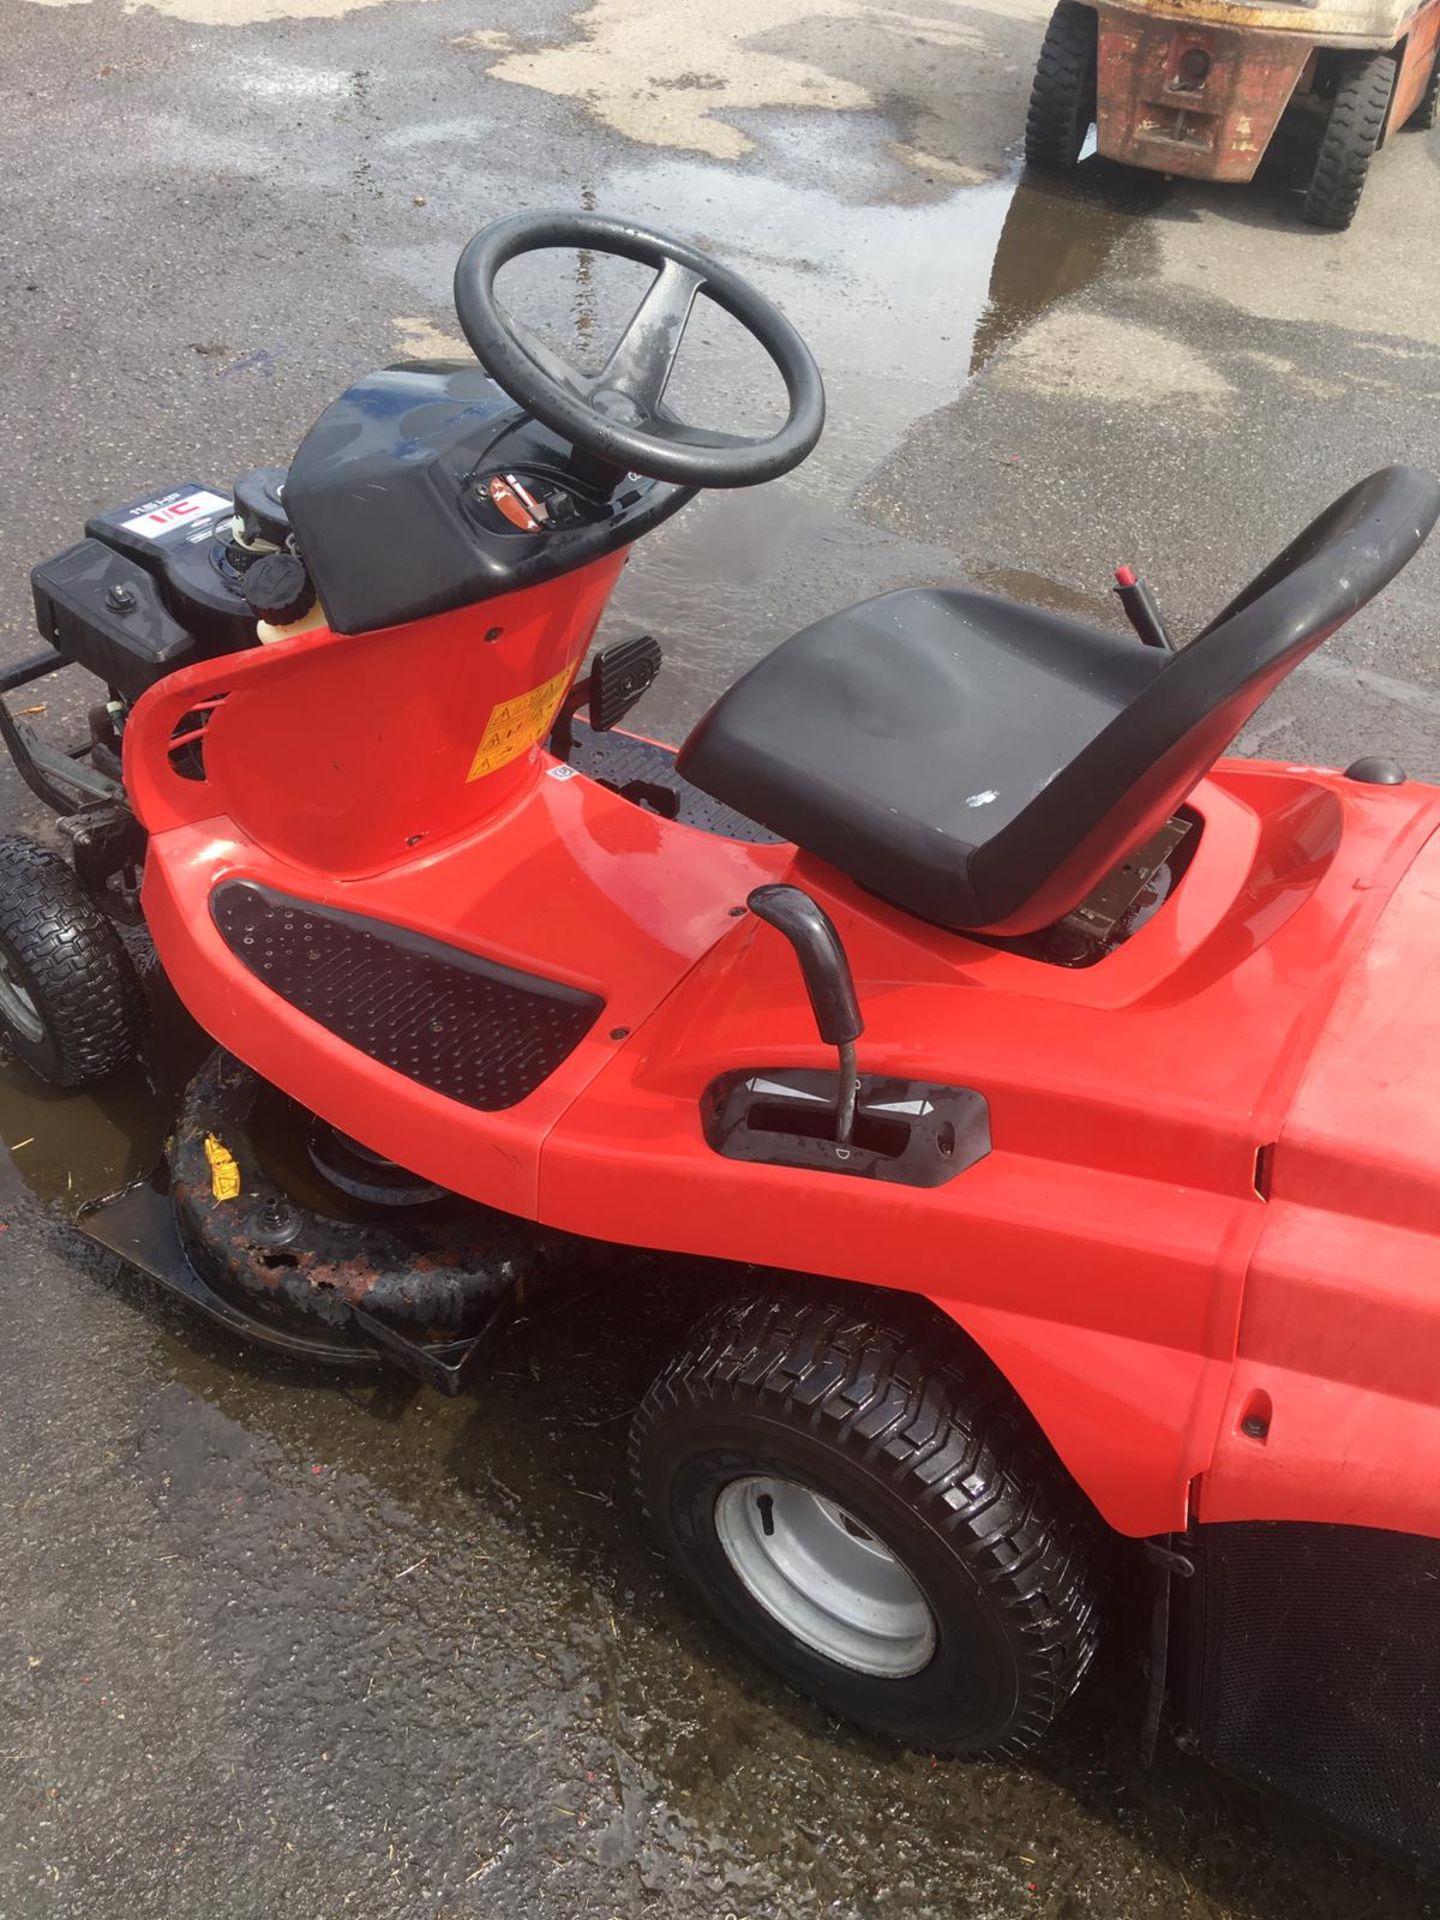 AL-KO T15-102 HD RIDE ON LAWN MOWER, 225 KG, YEAR 2002, C/W REAR GRASS COLLECTOR, 11.5HP I/C ENGINE - Image 2 of 11